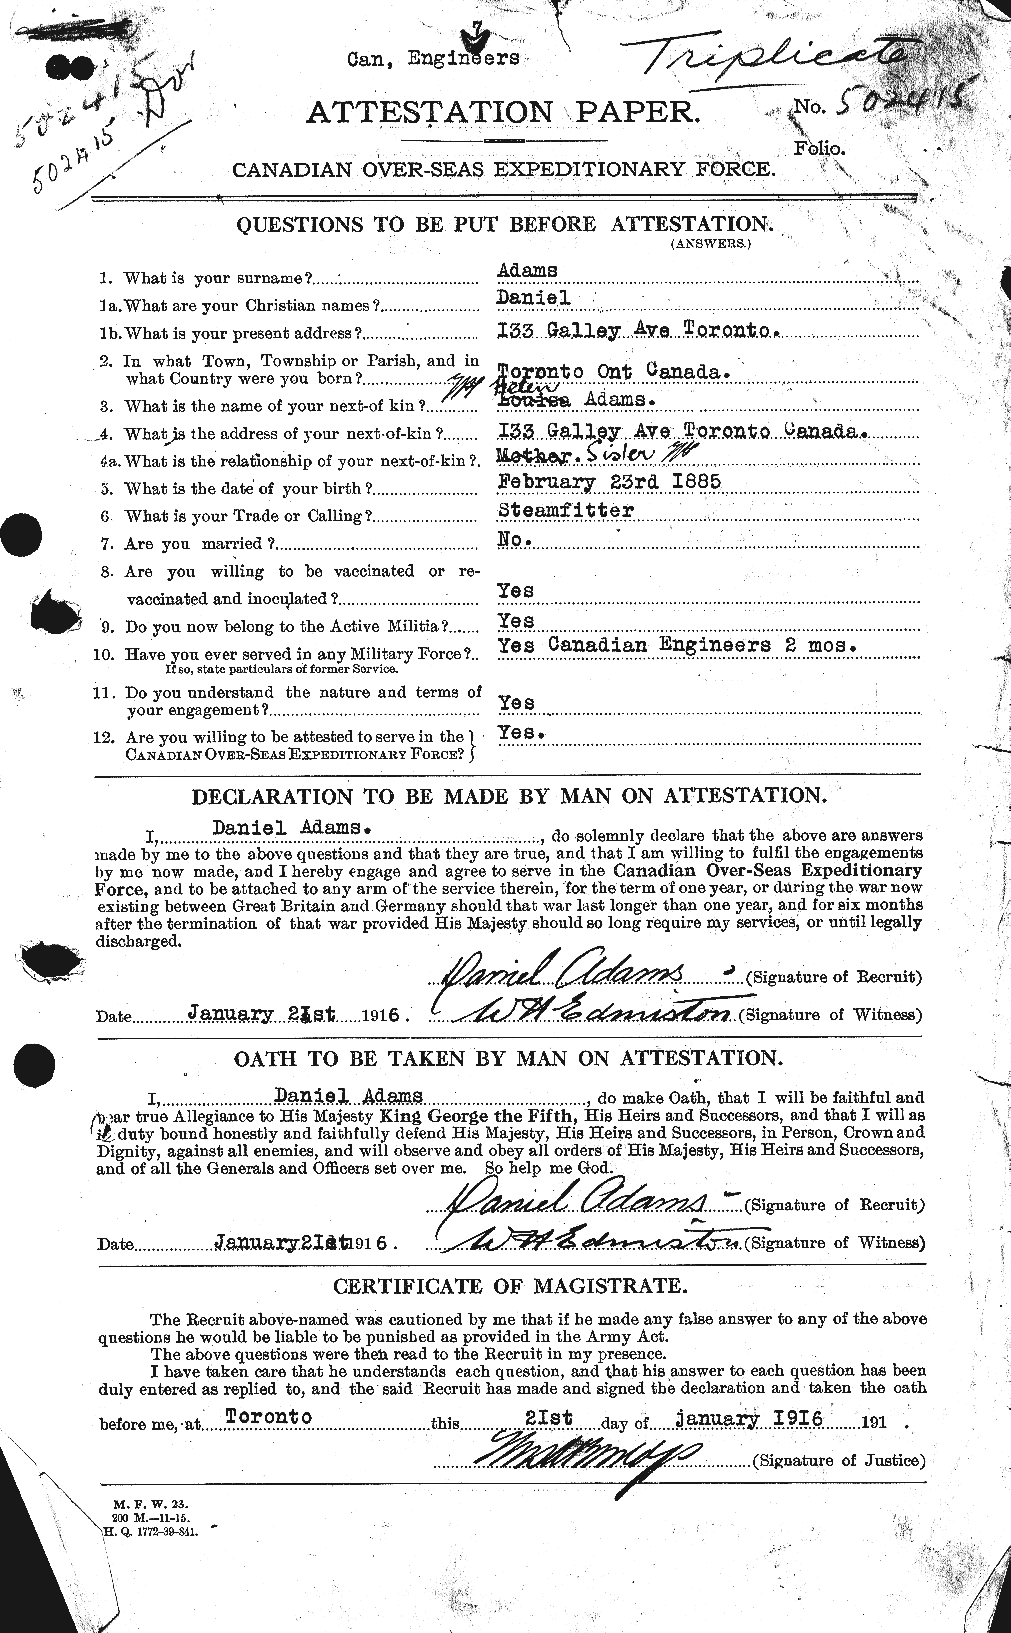 Personnel Records of the First World War - CEF 202648a